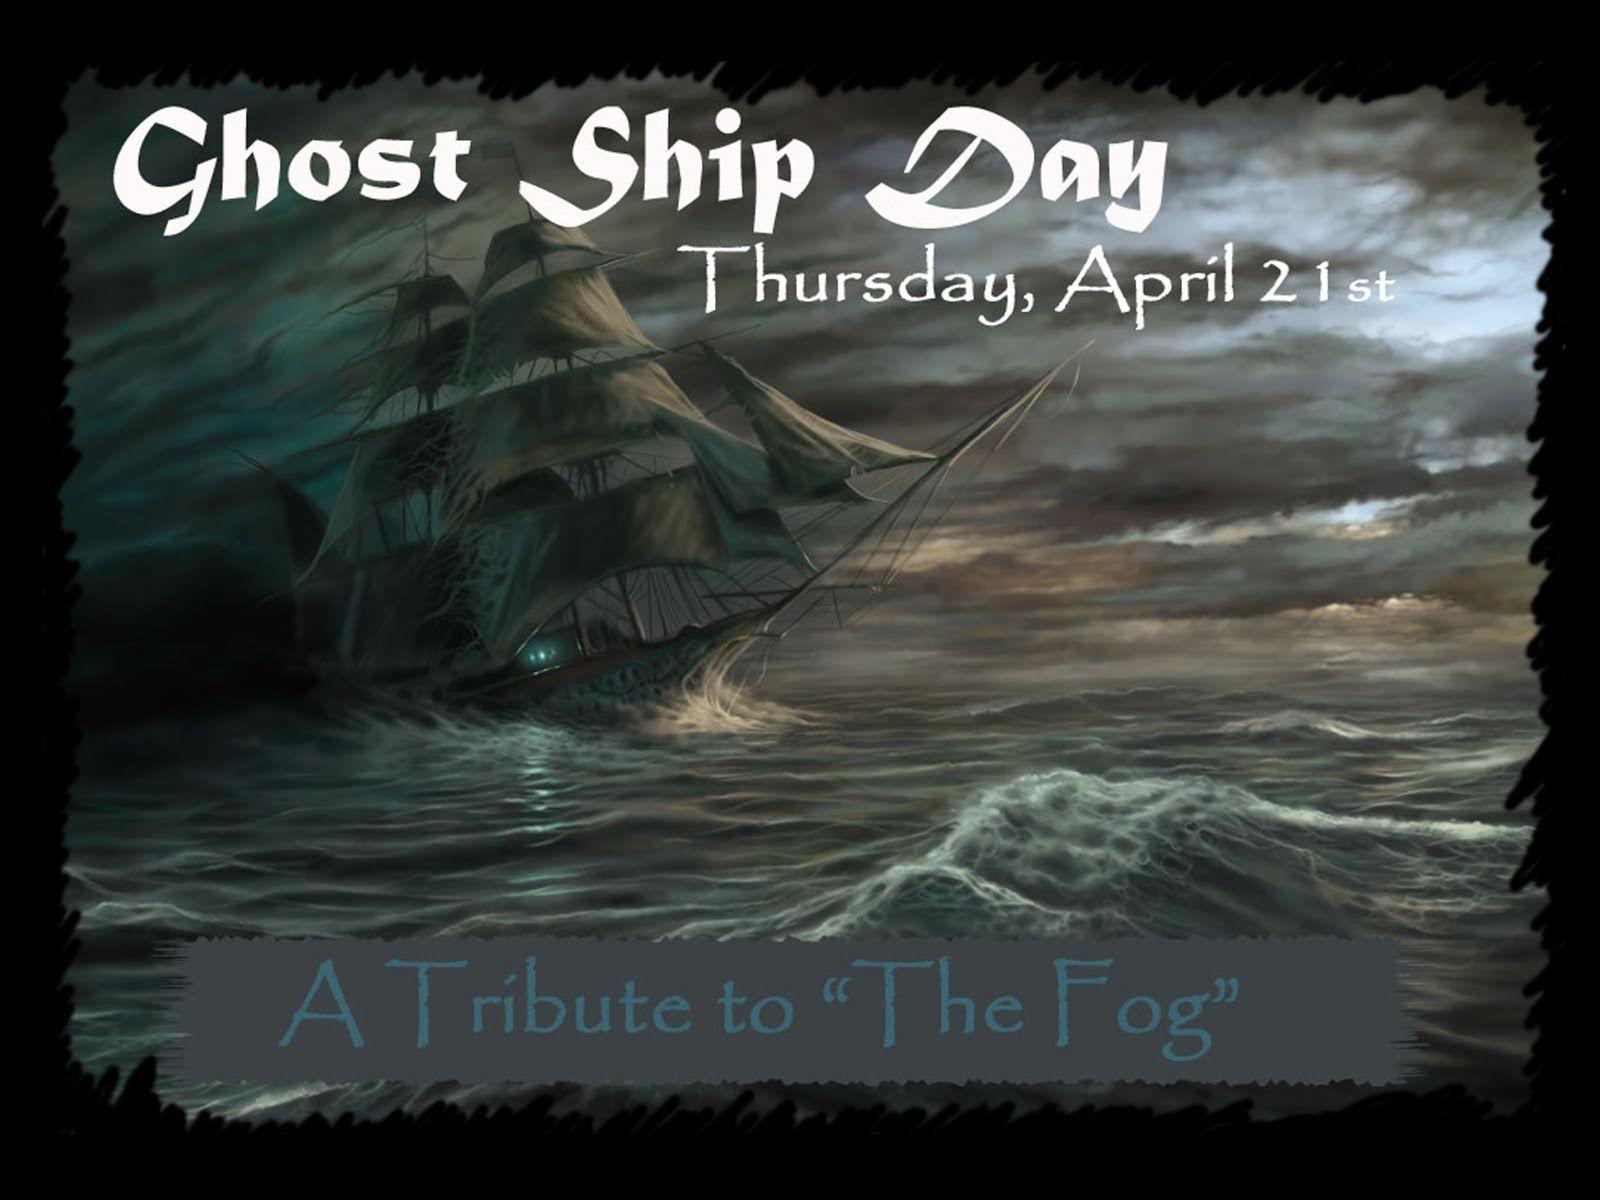 Ship Fog Logo - Johnny Thunder's Midnite Spook Frolic: Ghost Ship Day: A Tribute to